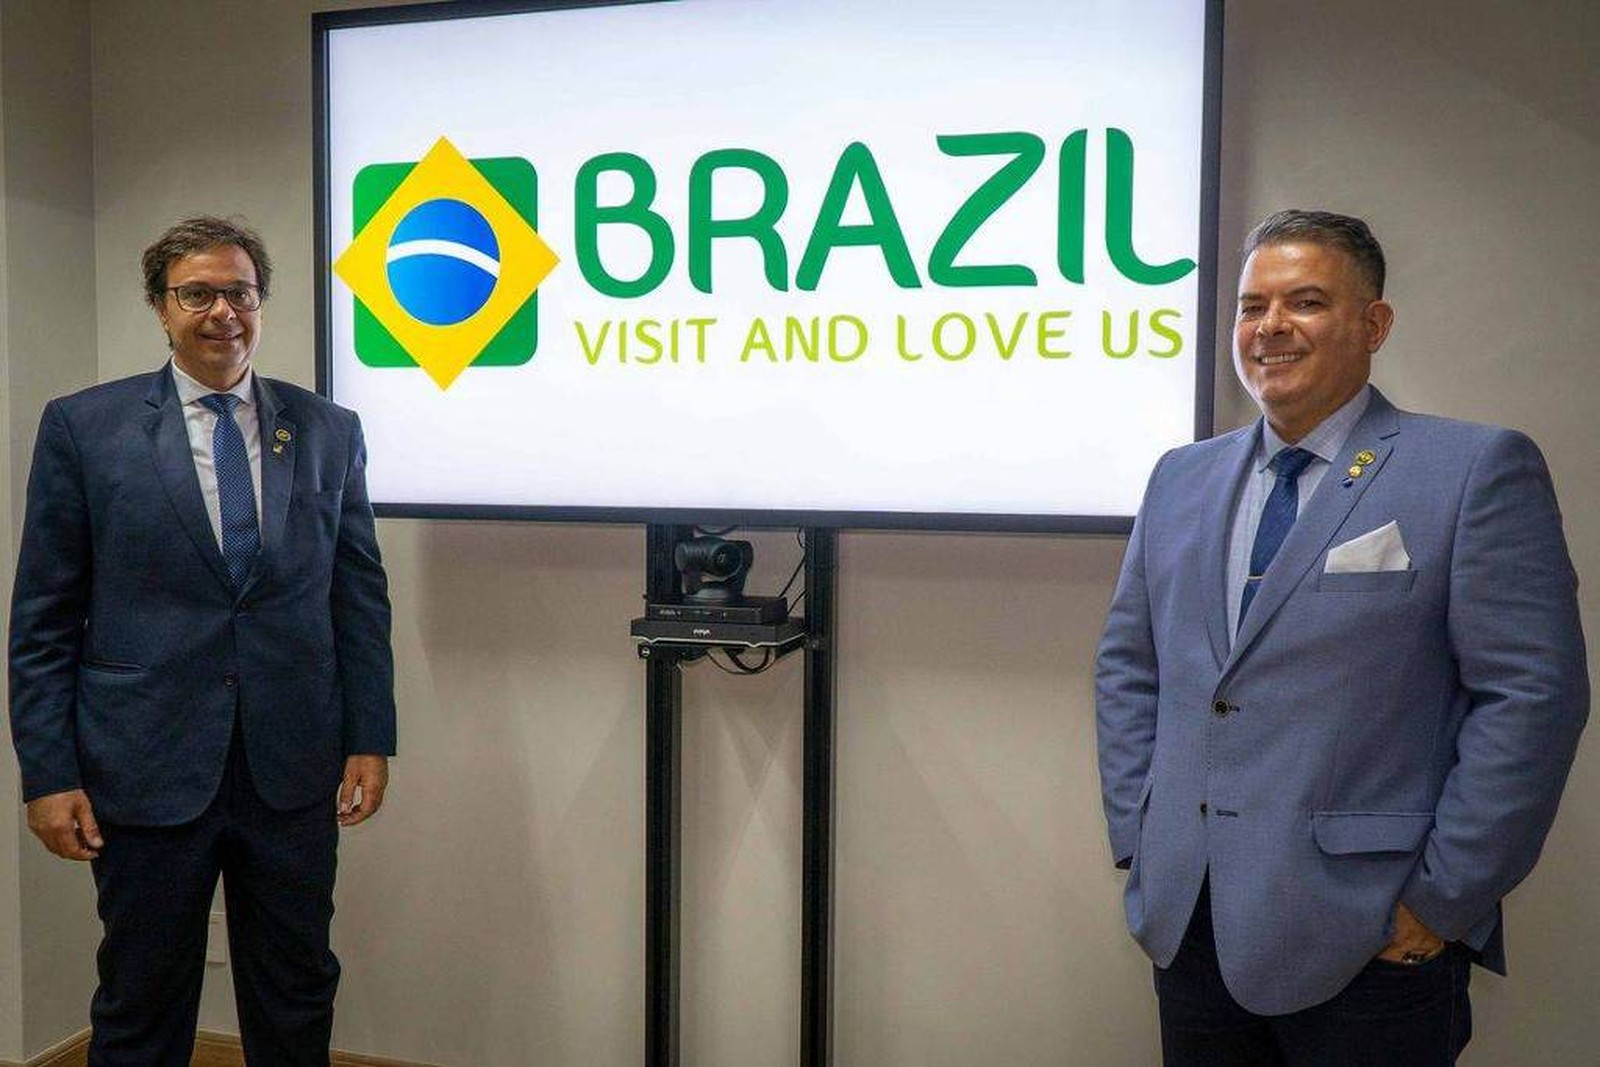 The brand 'Visit Brazil and love us' was developed to promote the country abroad.